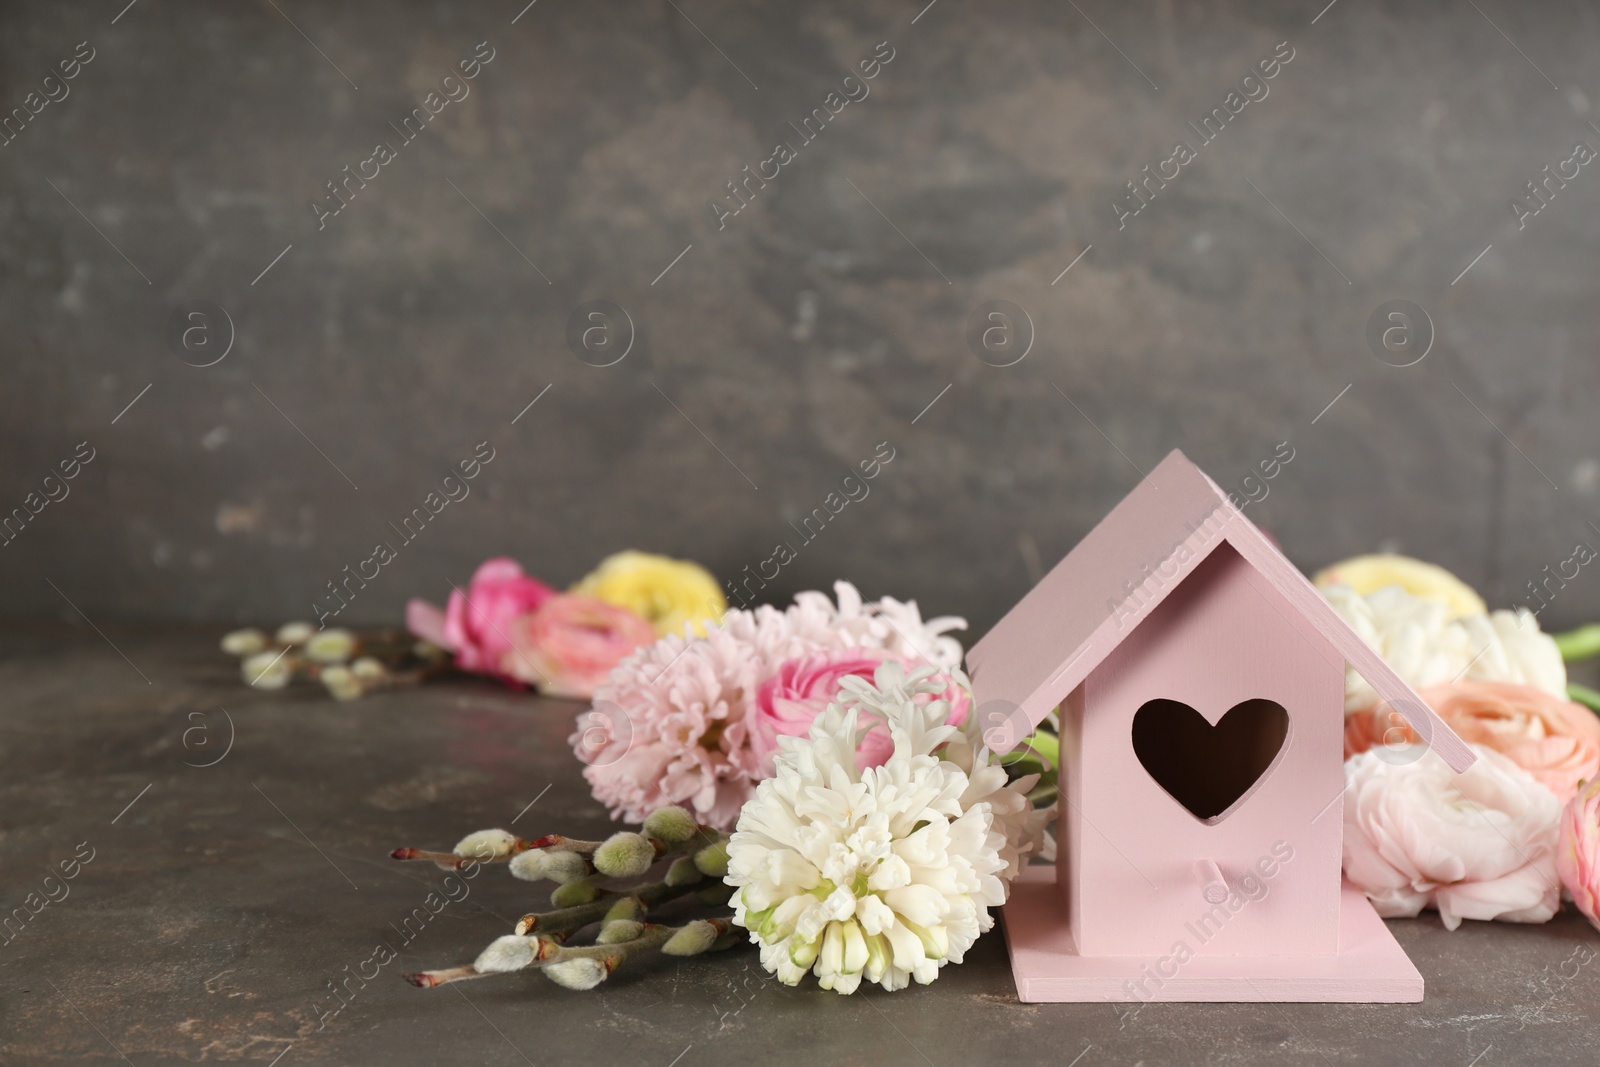 Photo of Stylish bird house and fresh flowers on grey stone background. Space for text